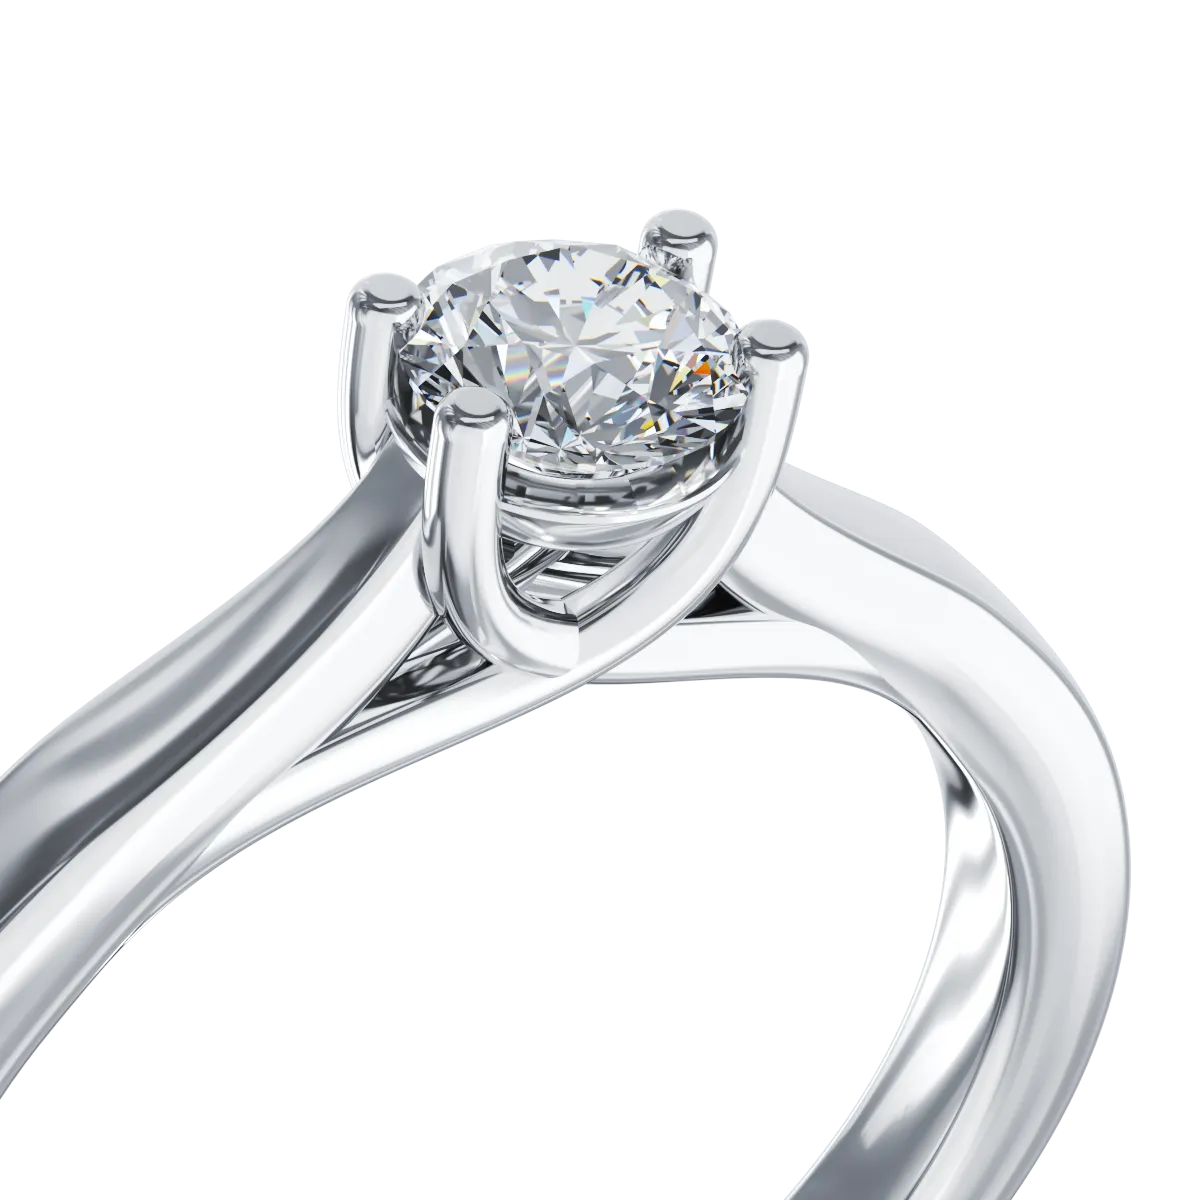 18K white gold engagement ring with a 0.15ct solitaire diamond